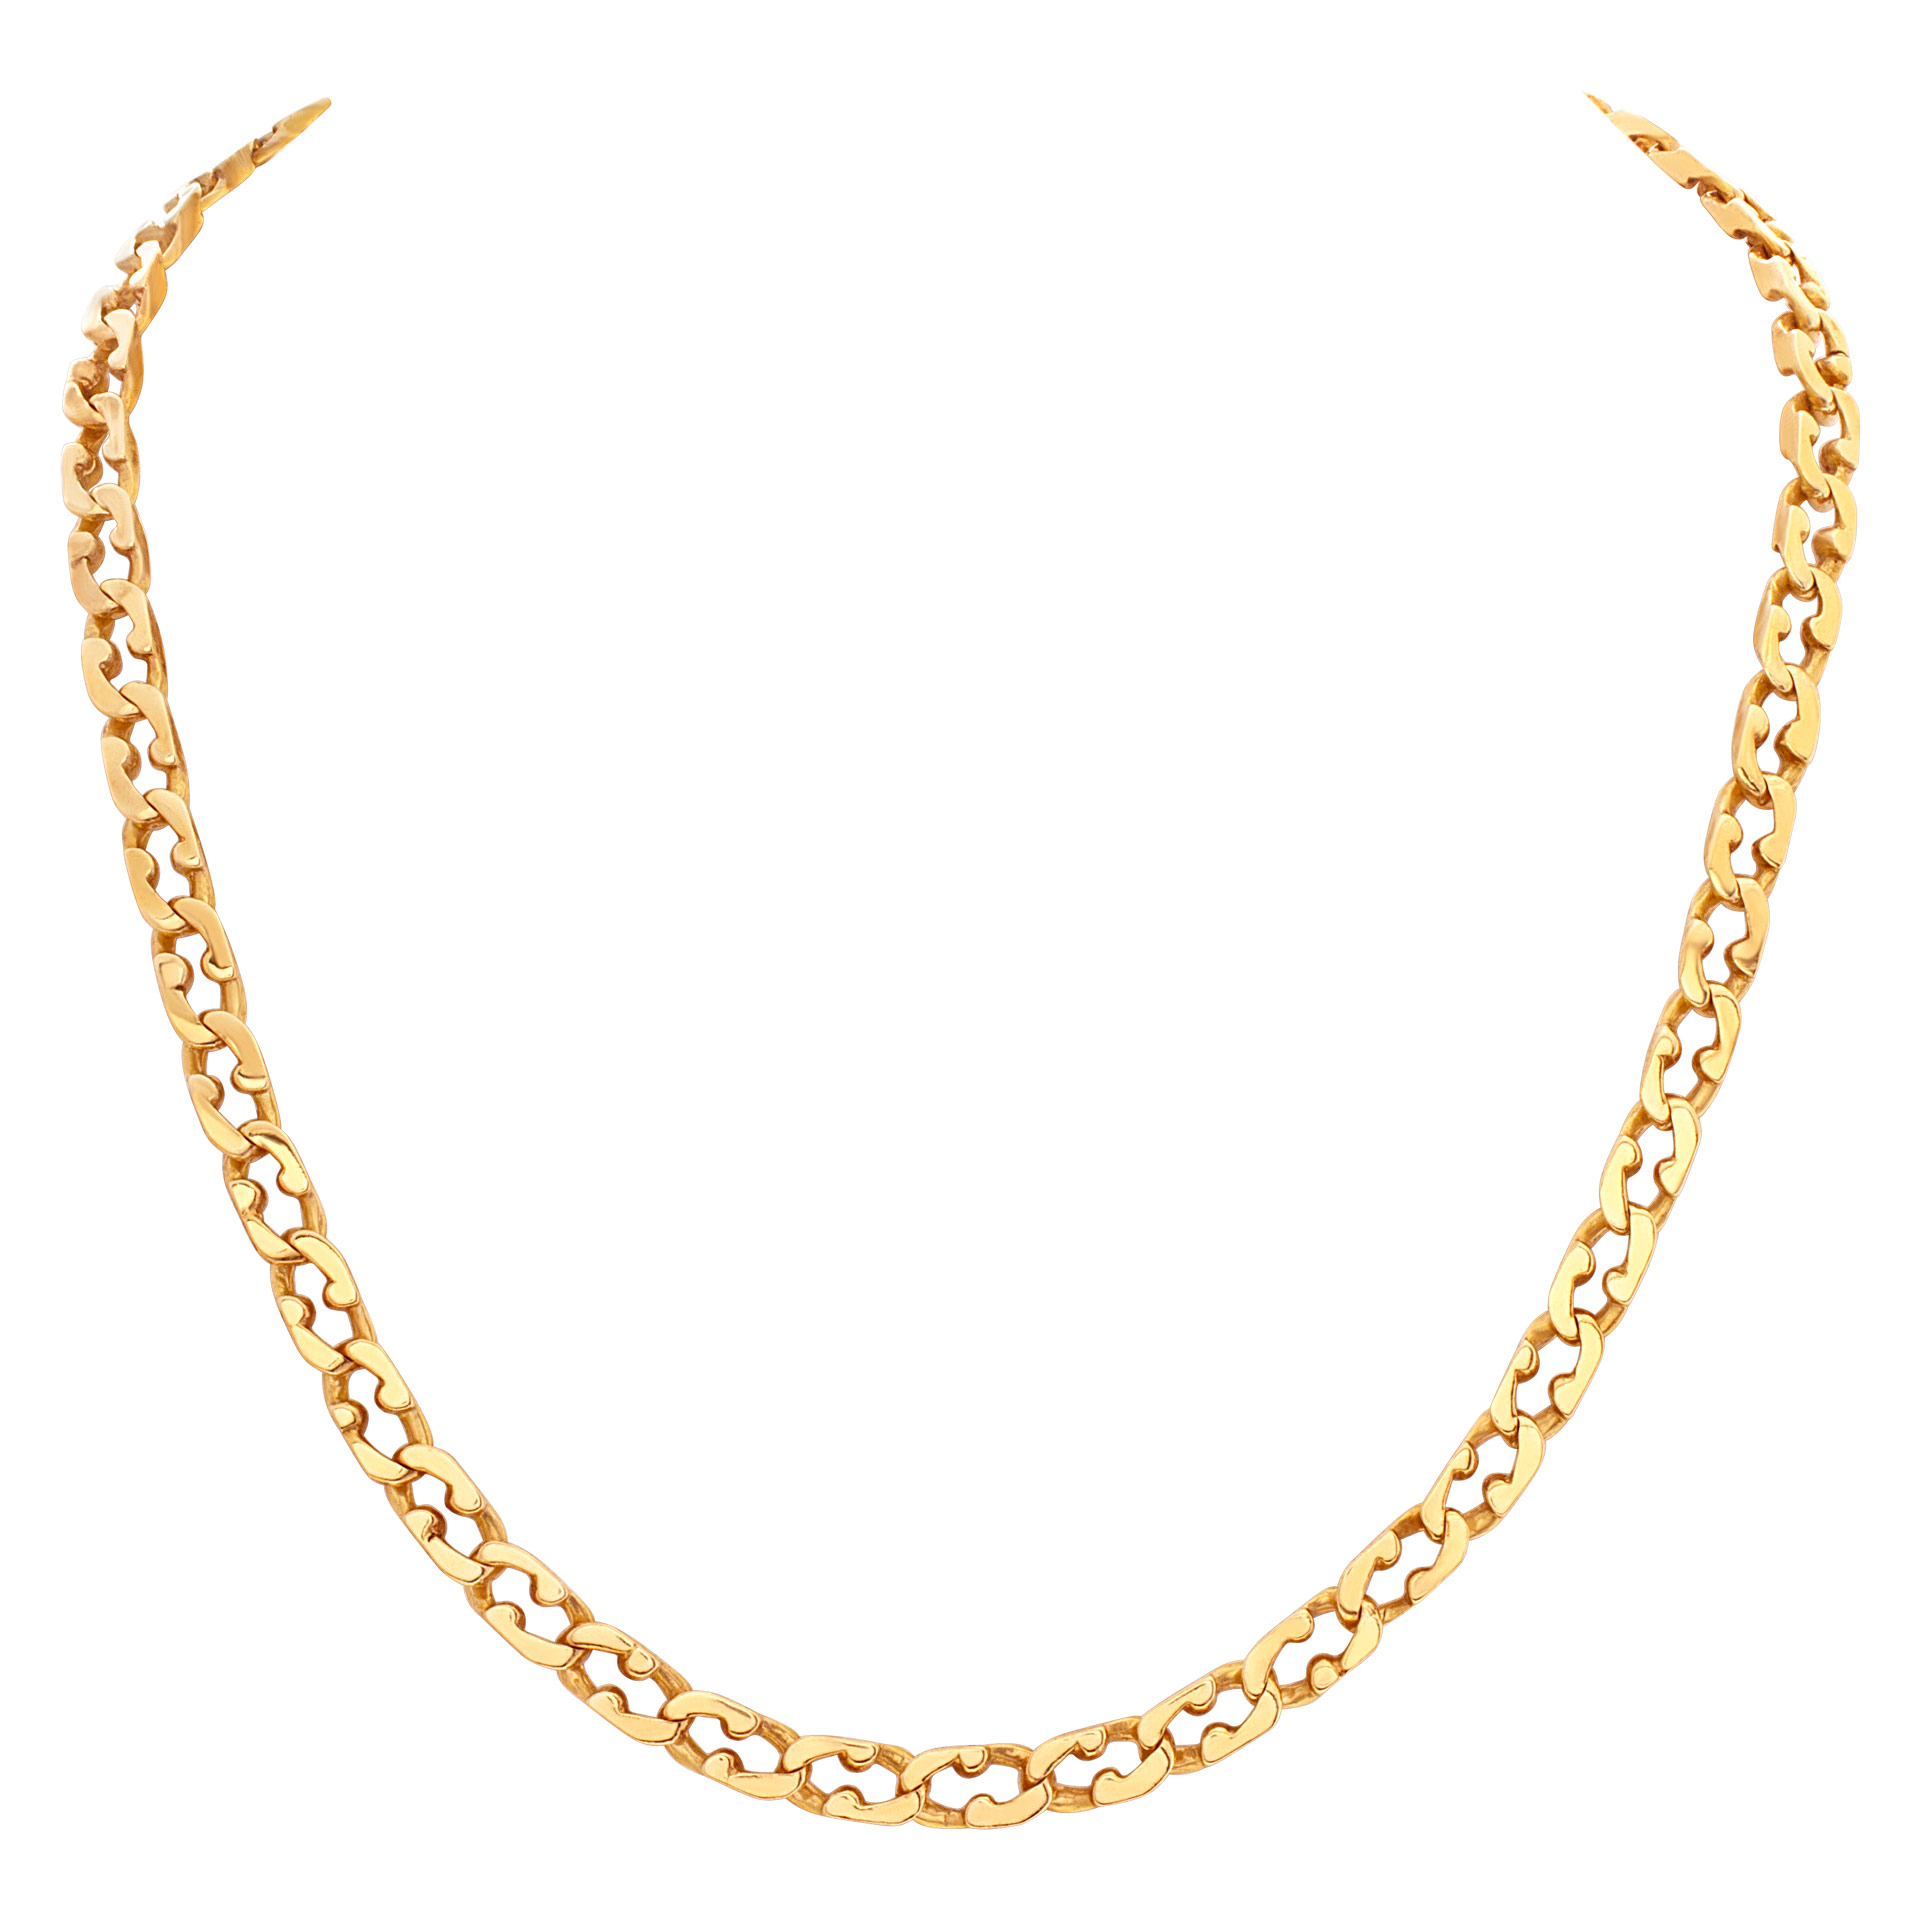 Handsome link necklace in 14k yellow gold, 17.5'' length